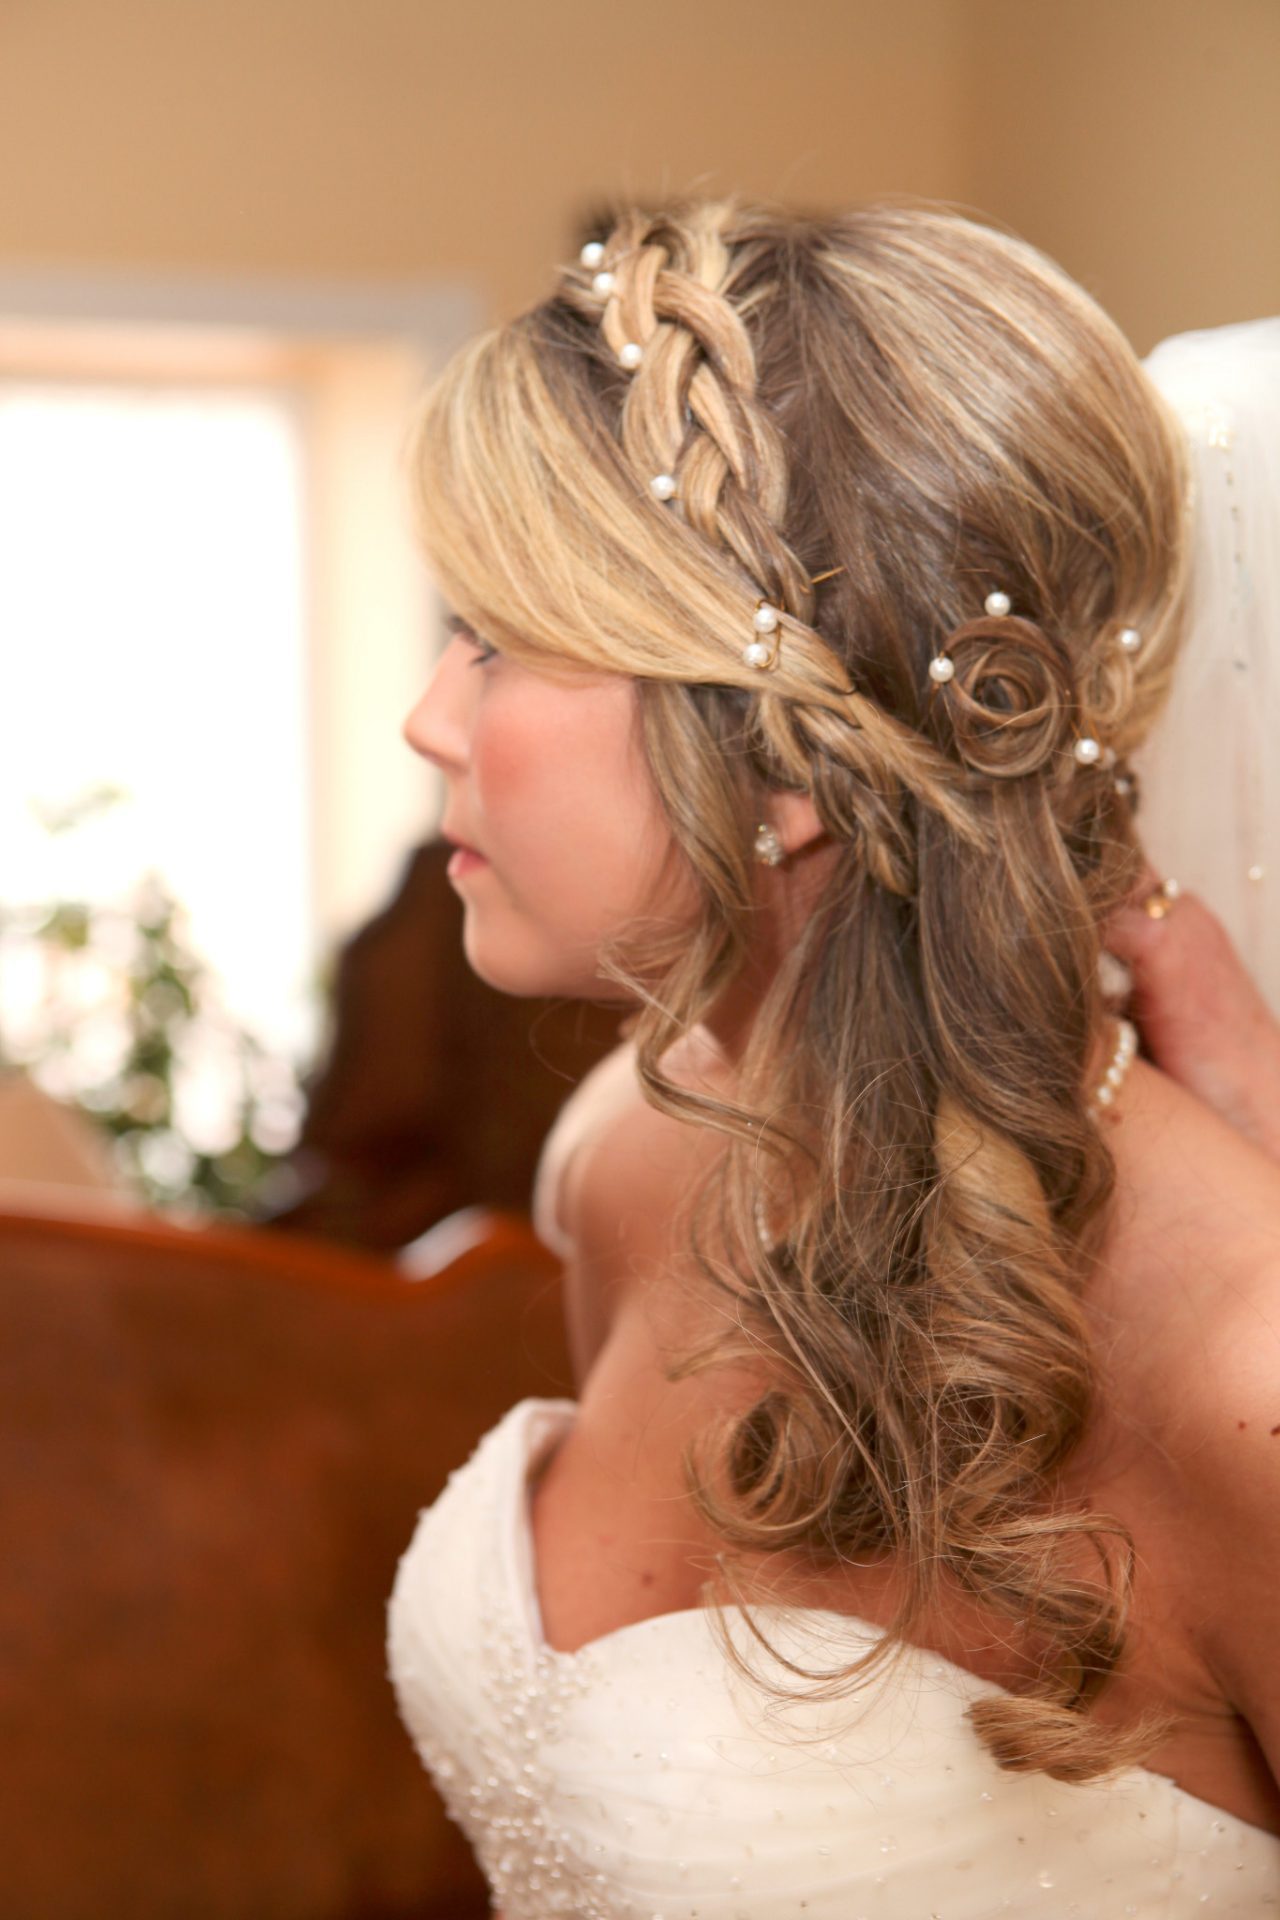 Bride's hair style with light curls and braids